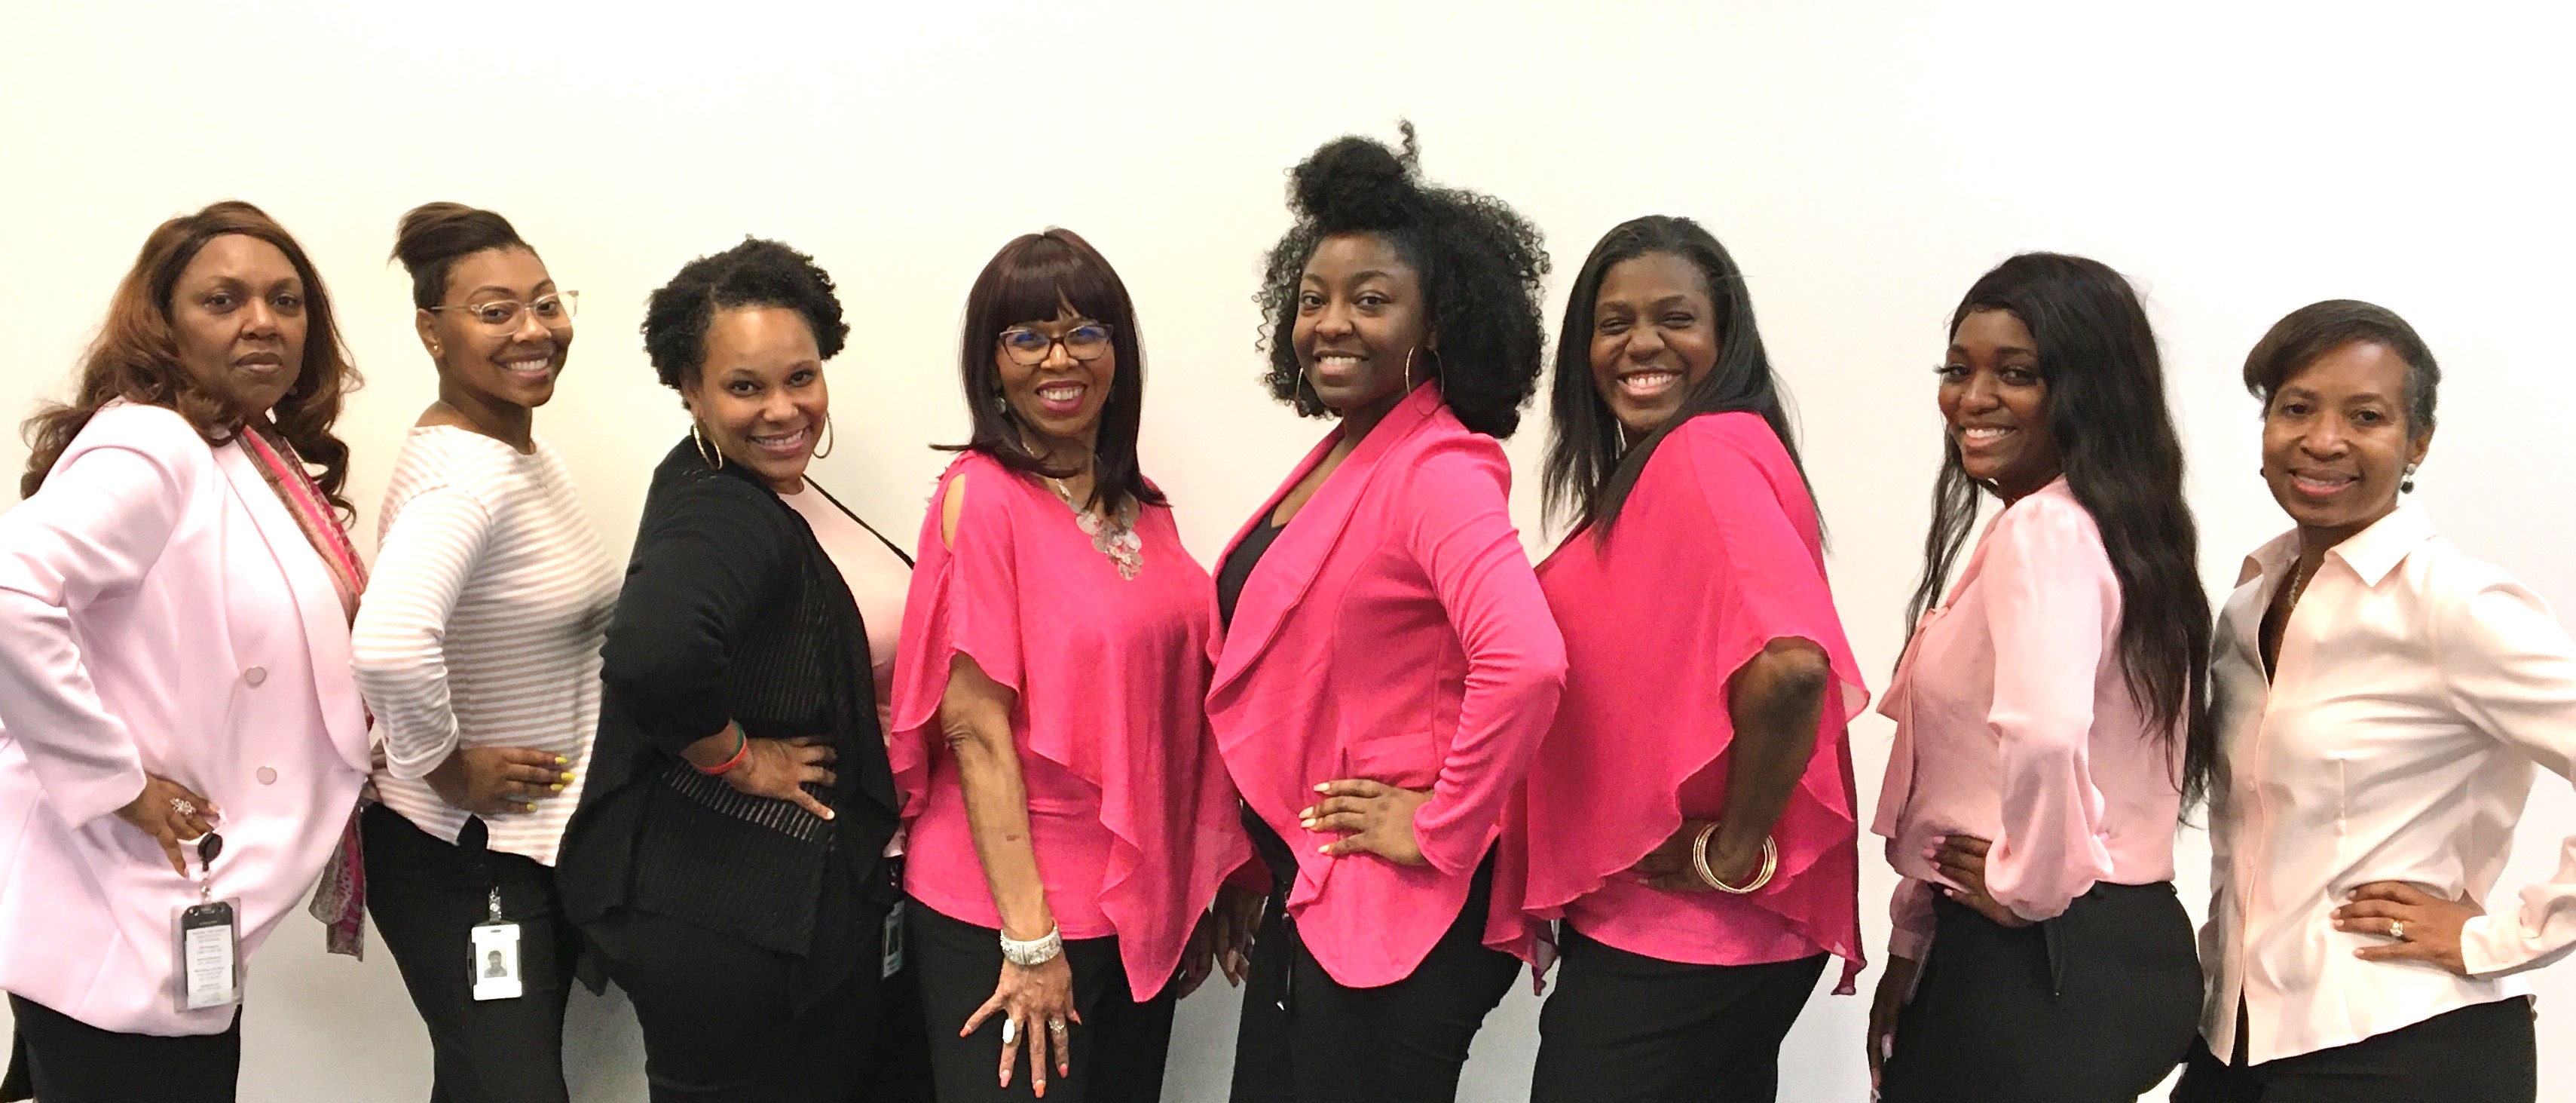 "I'm grateful for their research and lives that have been saved thru early detection."-Chanel Myers, Customer Services Supv, Georgia Power